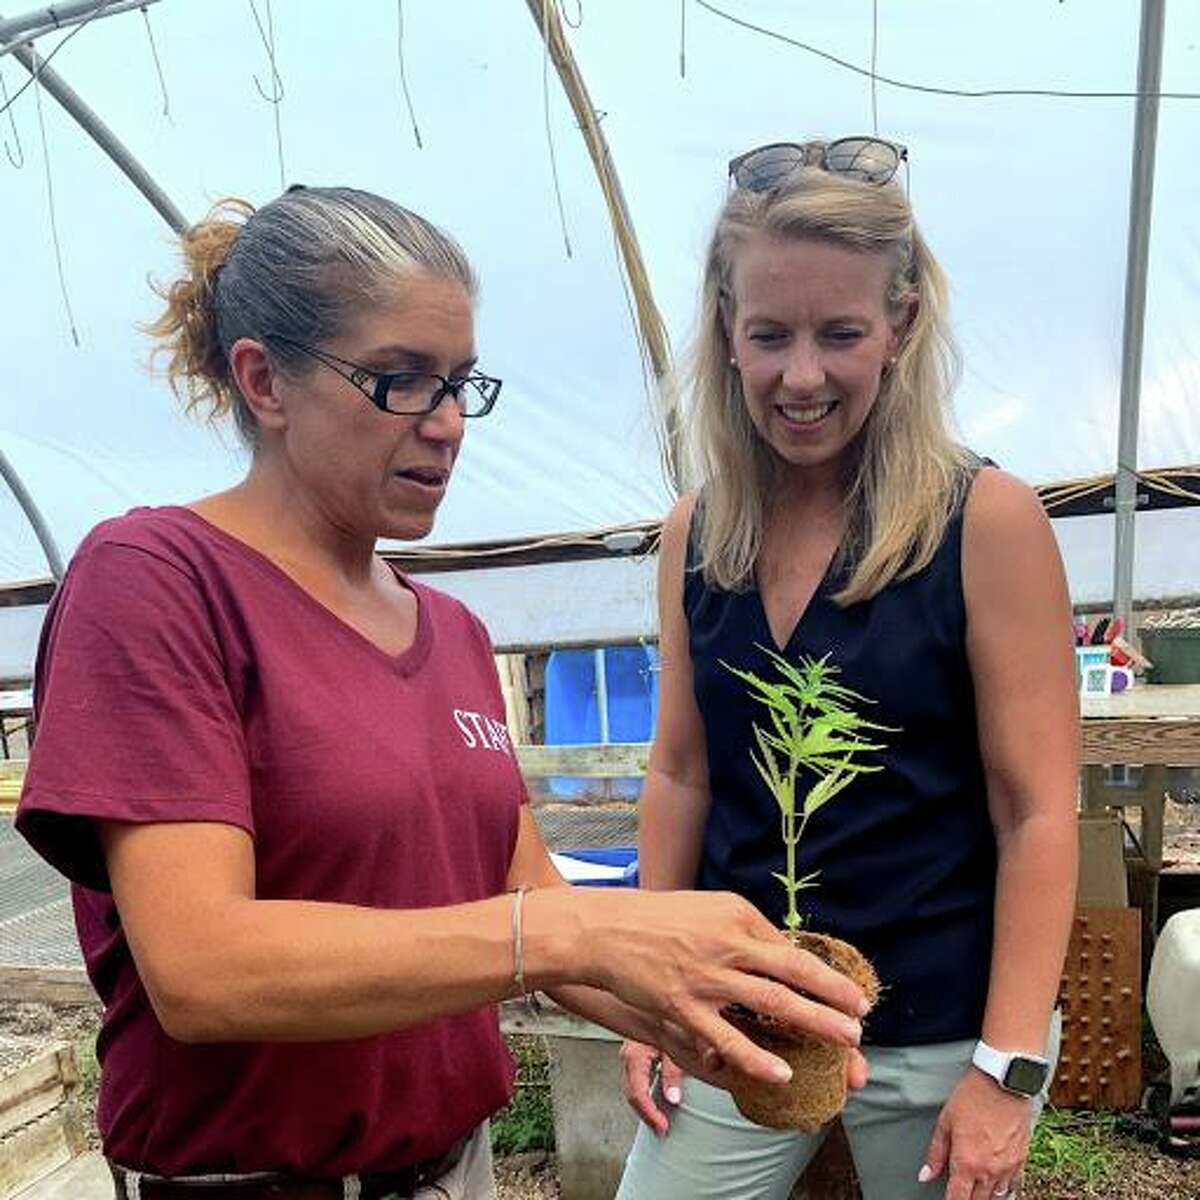 Hemp plants are being grown in the greenhouses at Running Brook Farms in Killingworth. From left, site manager Becky Goetsch shows a plant to state Sen. Christine Cohen, D-Guilford.